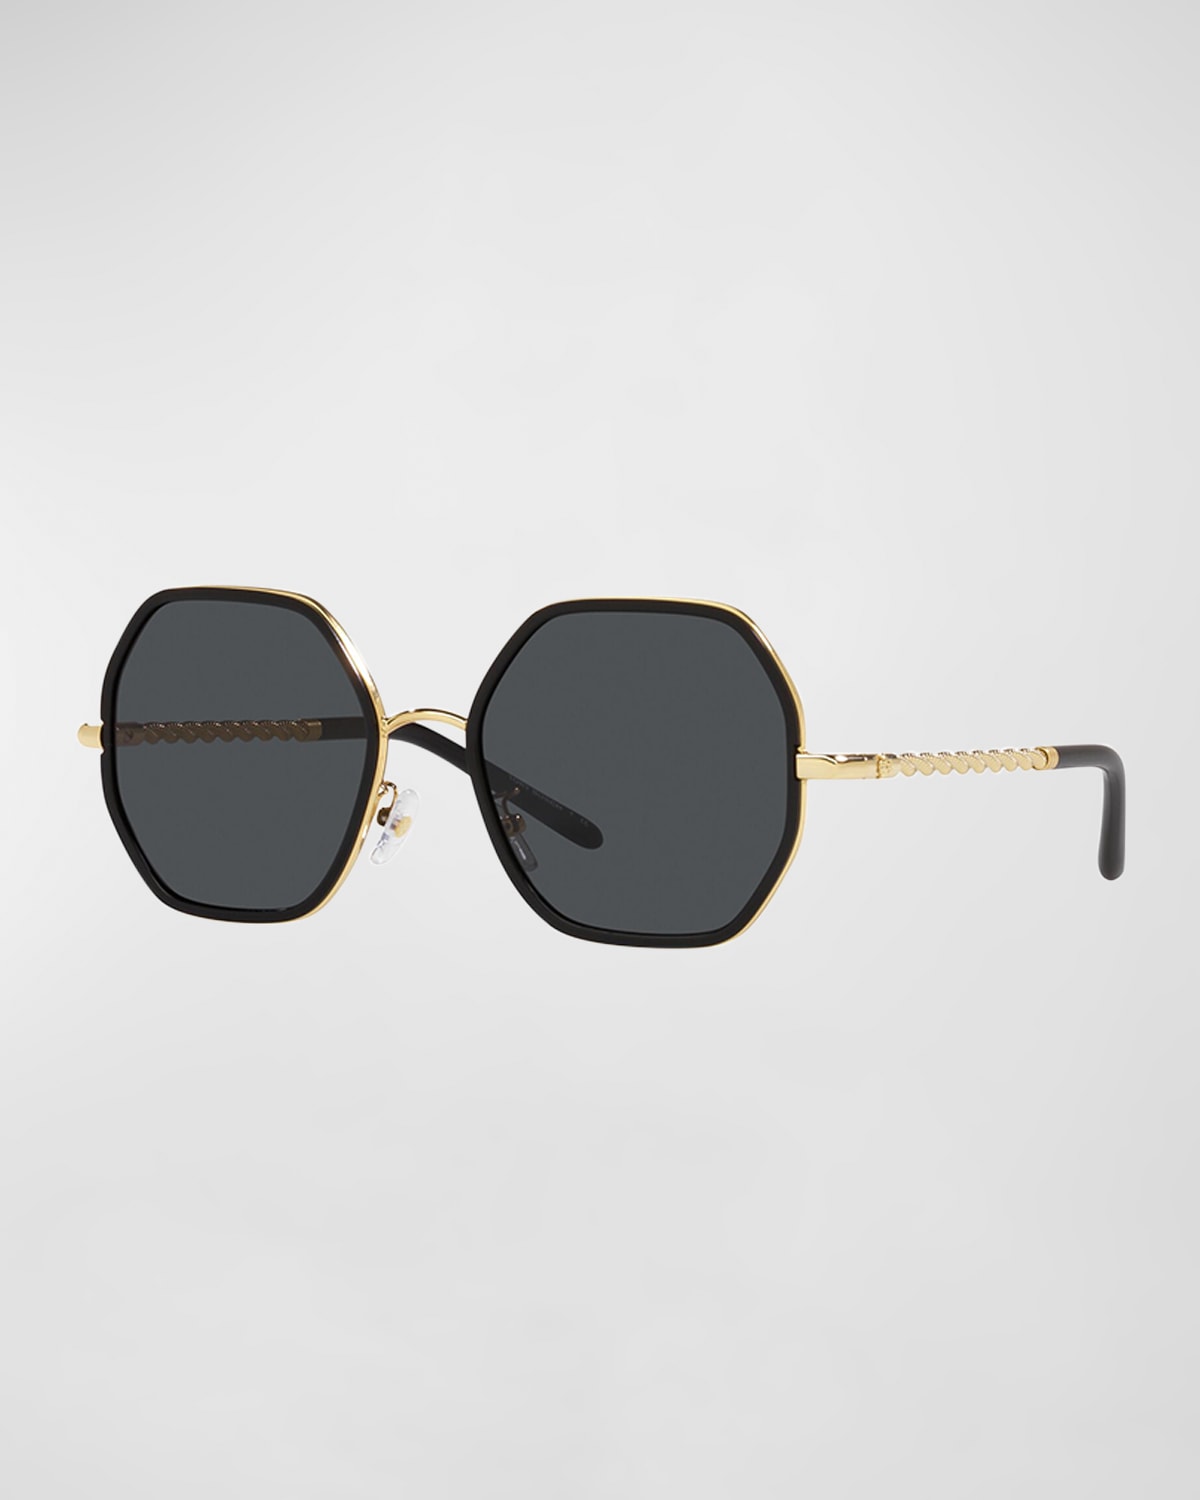 TORY BURCH TWISTED SQUARE METAL SUNGLASSES